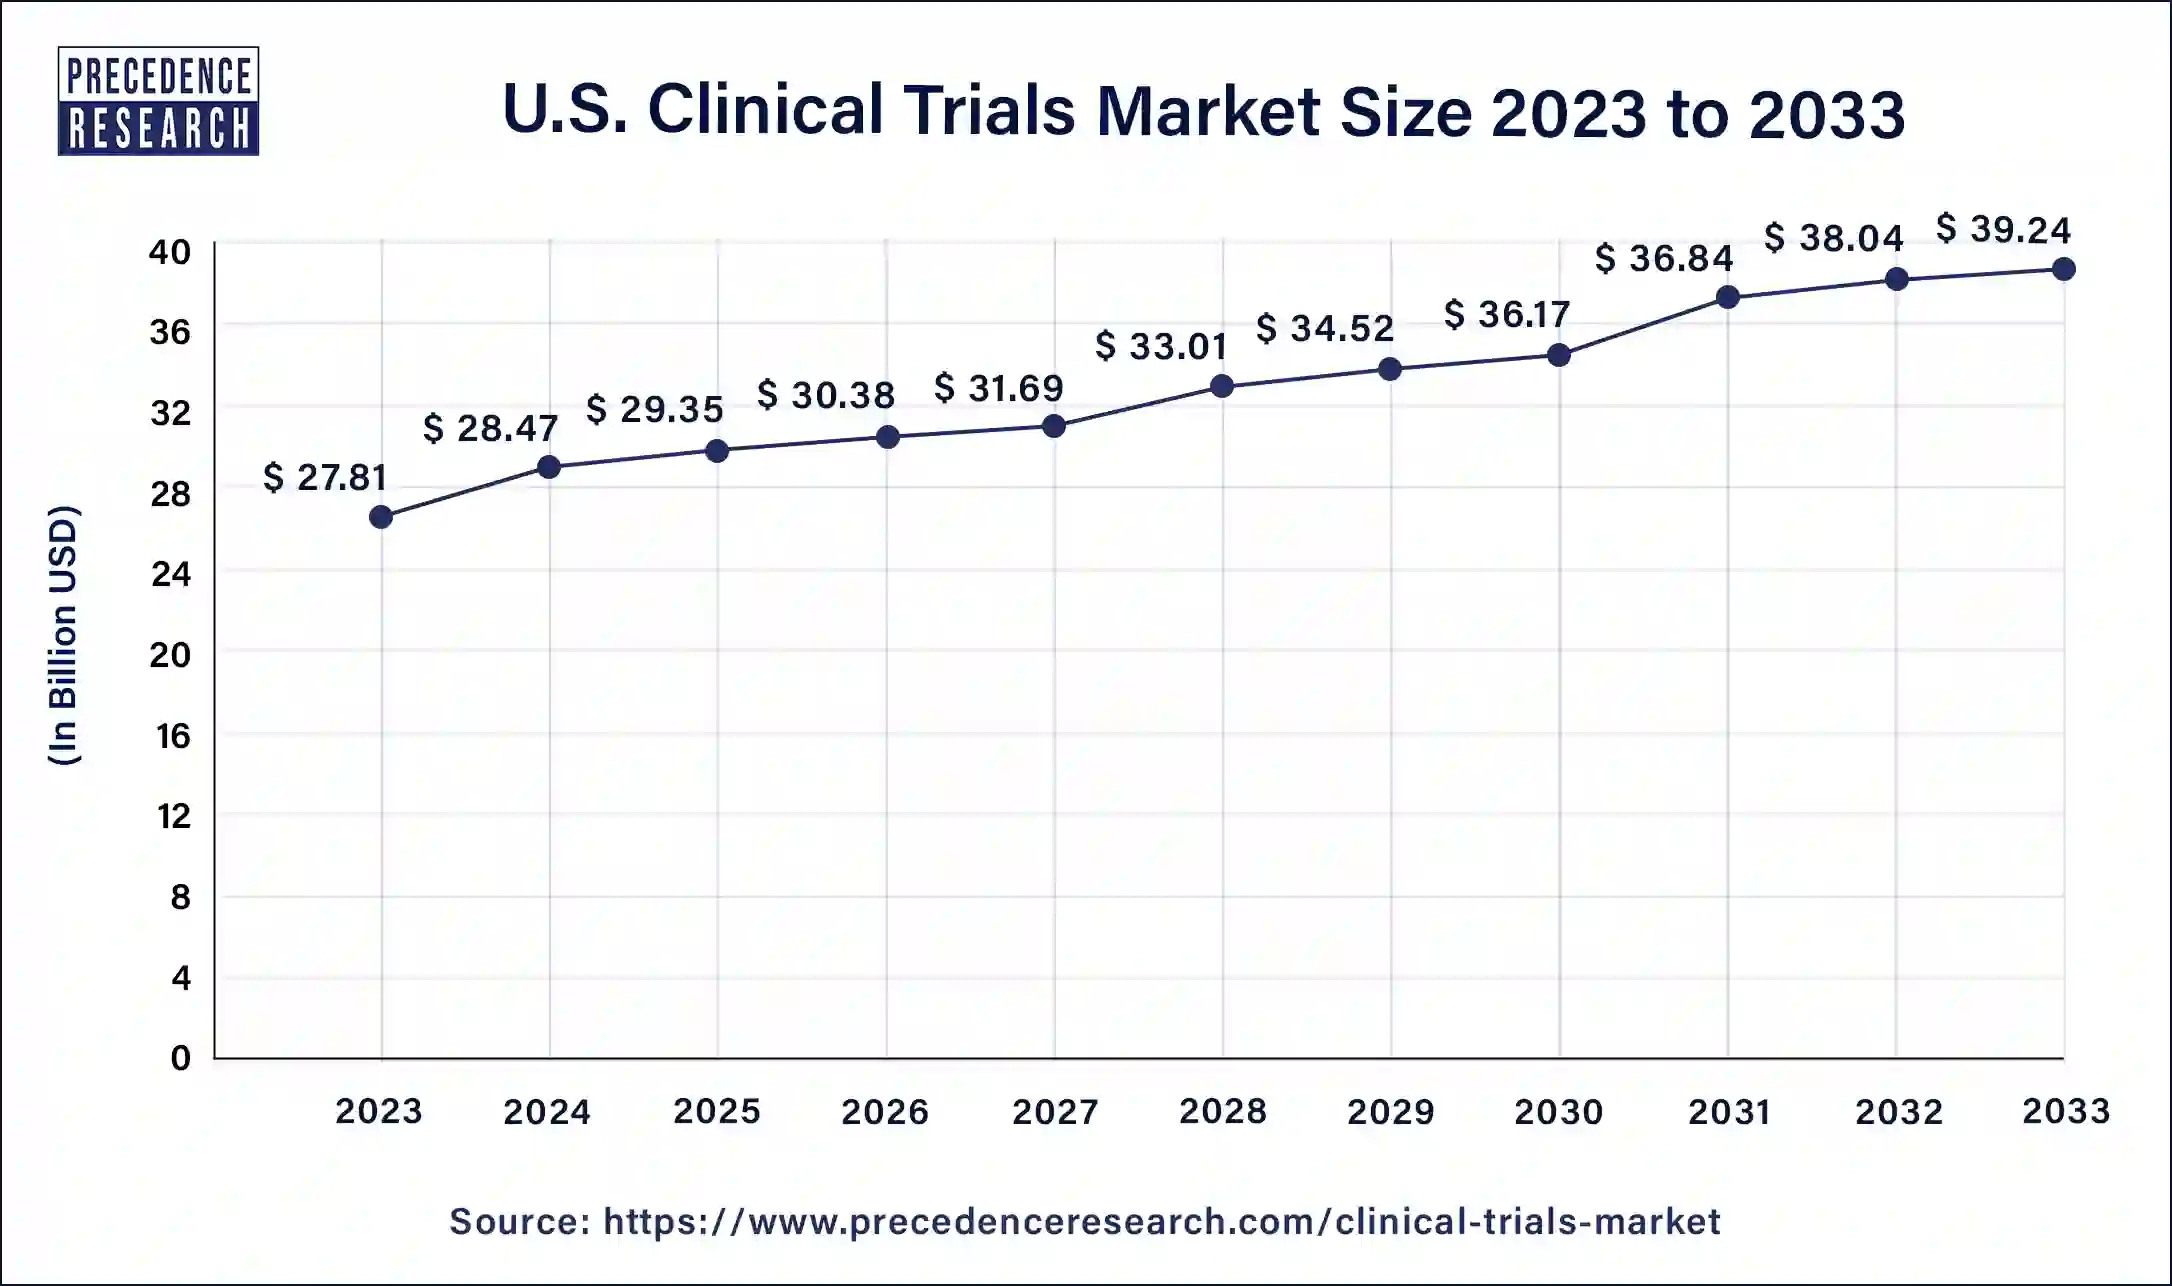 U.S. Clinical Trials Market Size 2024 To 2033